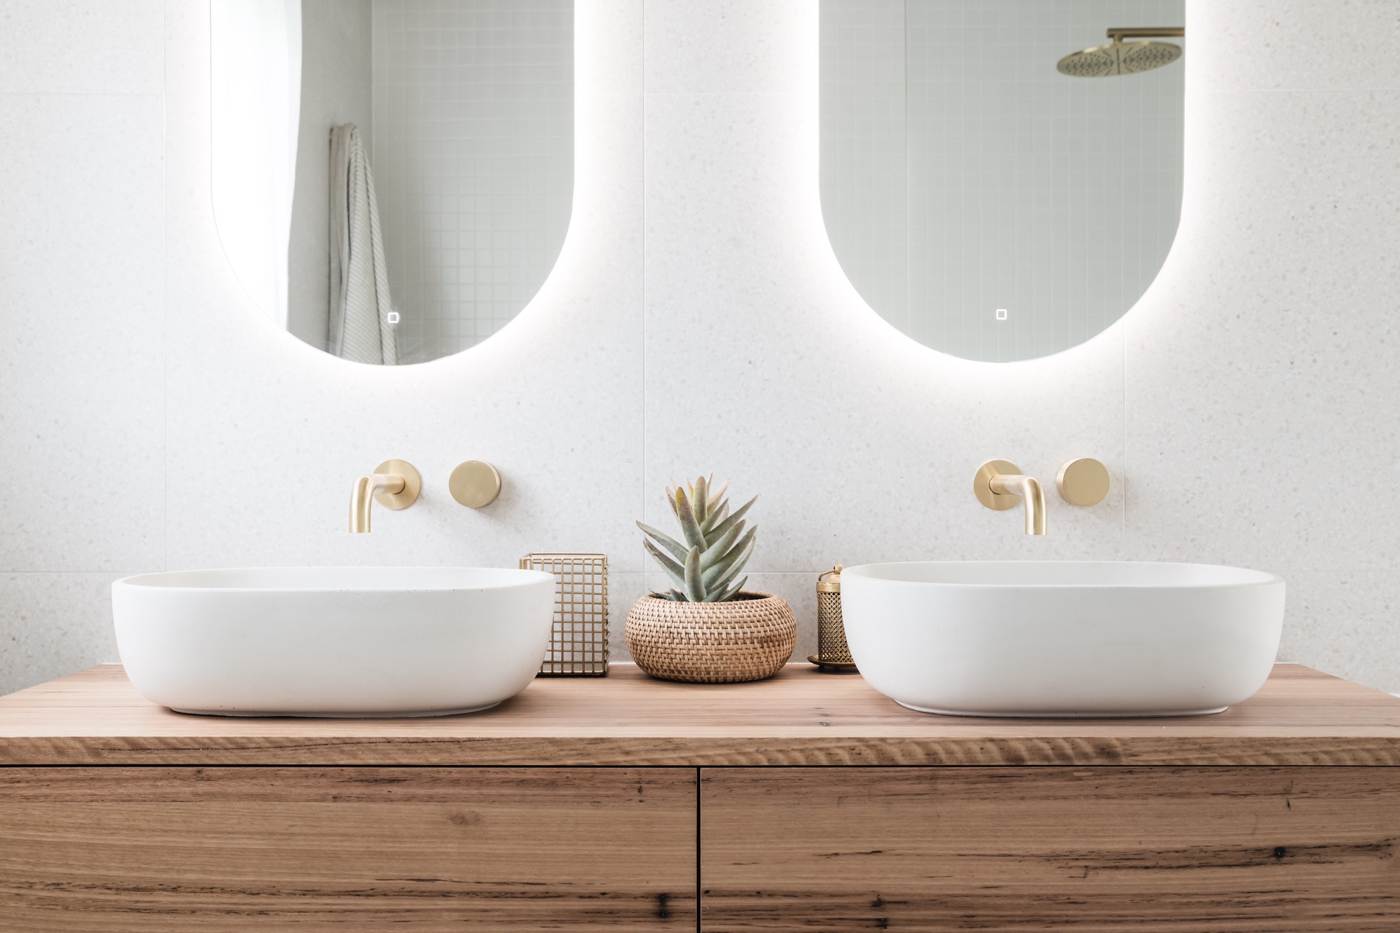 Modern baths with wood washbasin countertops and basins and bathroom fixtures in gold optics and mirrors with lighting and white granite tiles